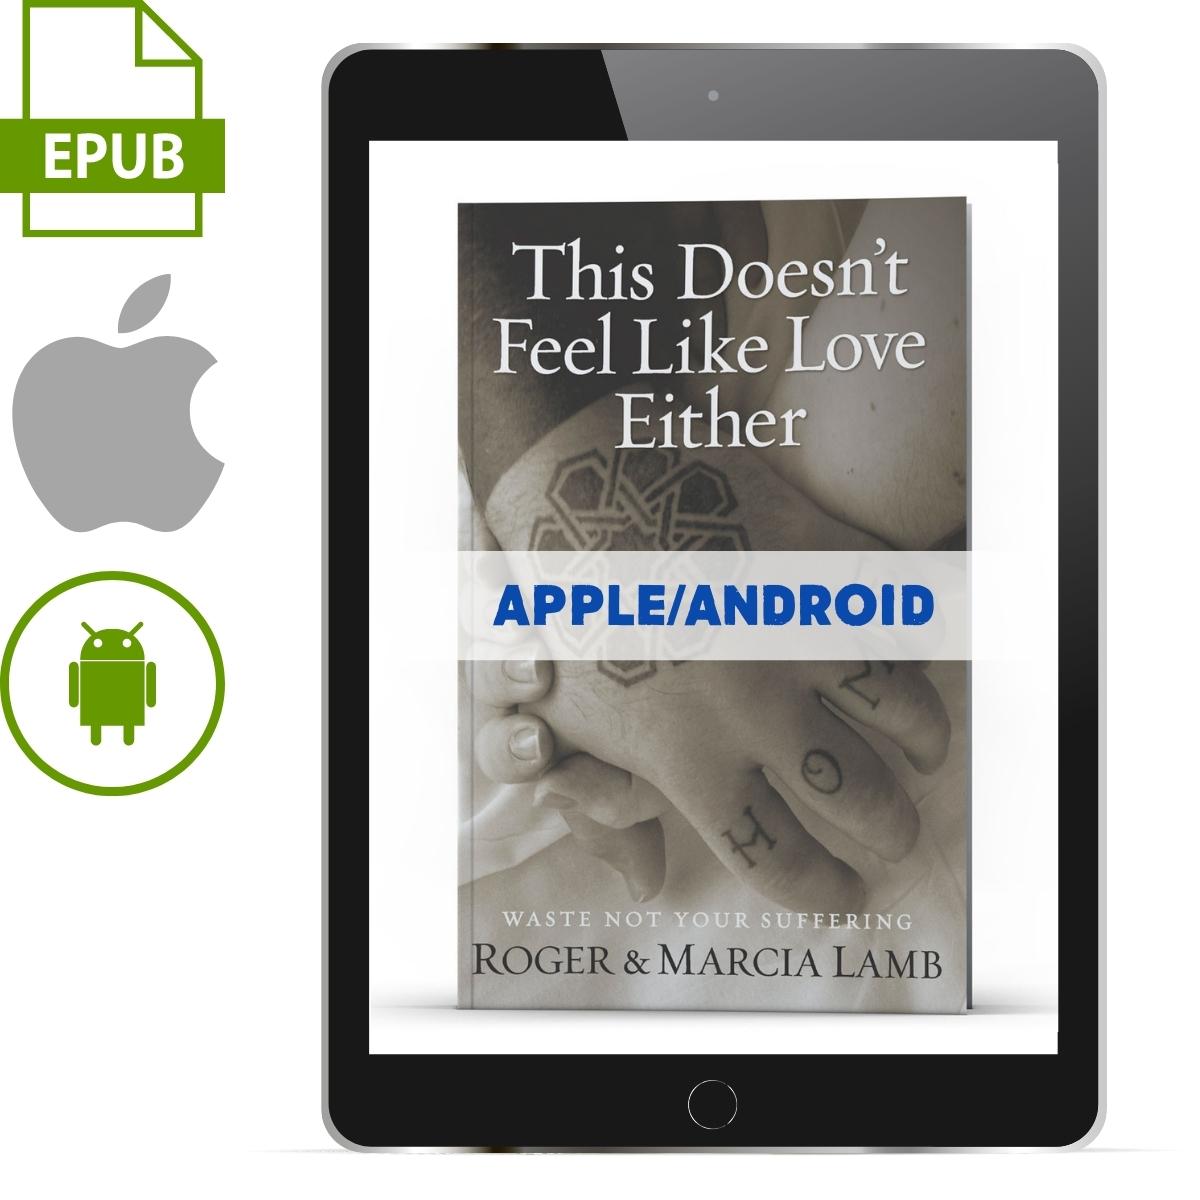 This Doesn't Feel Like Love Either ePub (Apple/Android) - Illumination Publishers